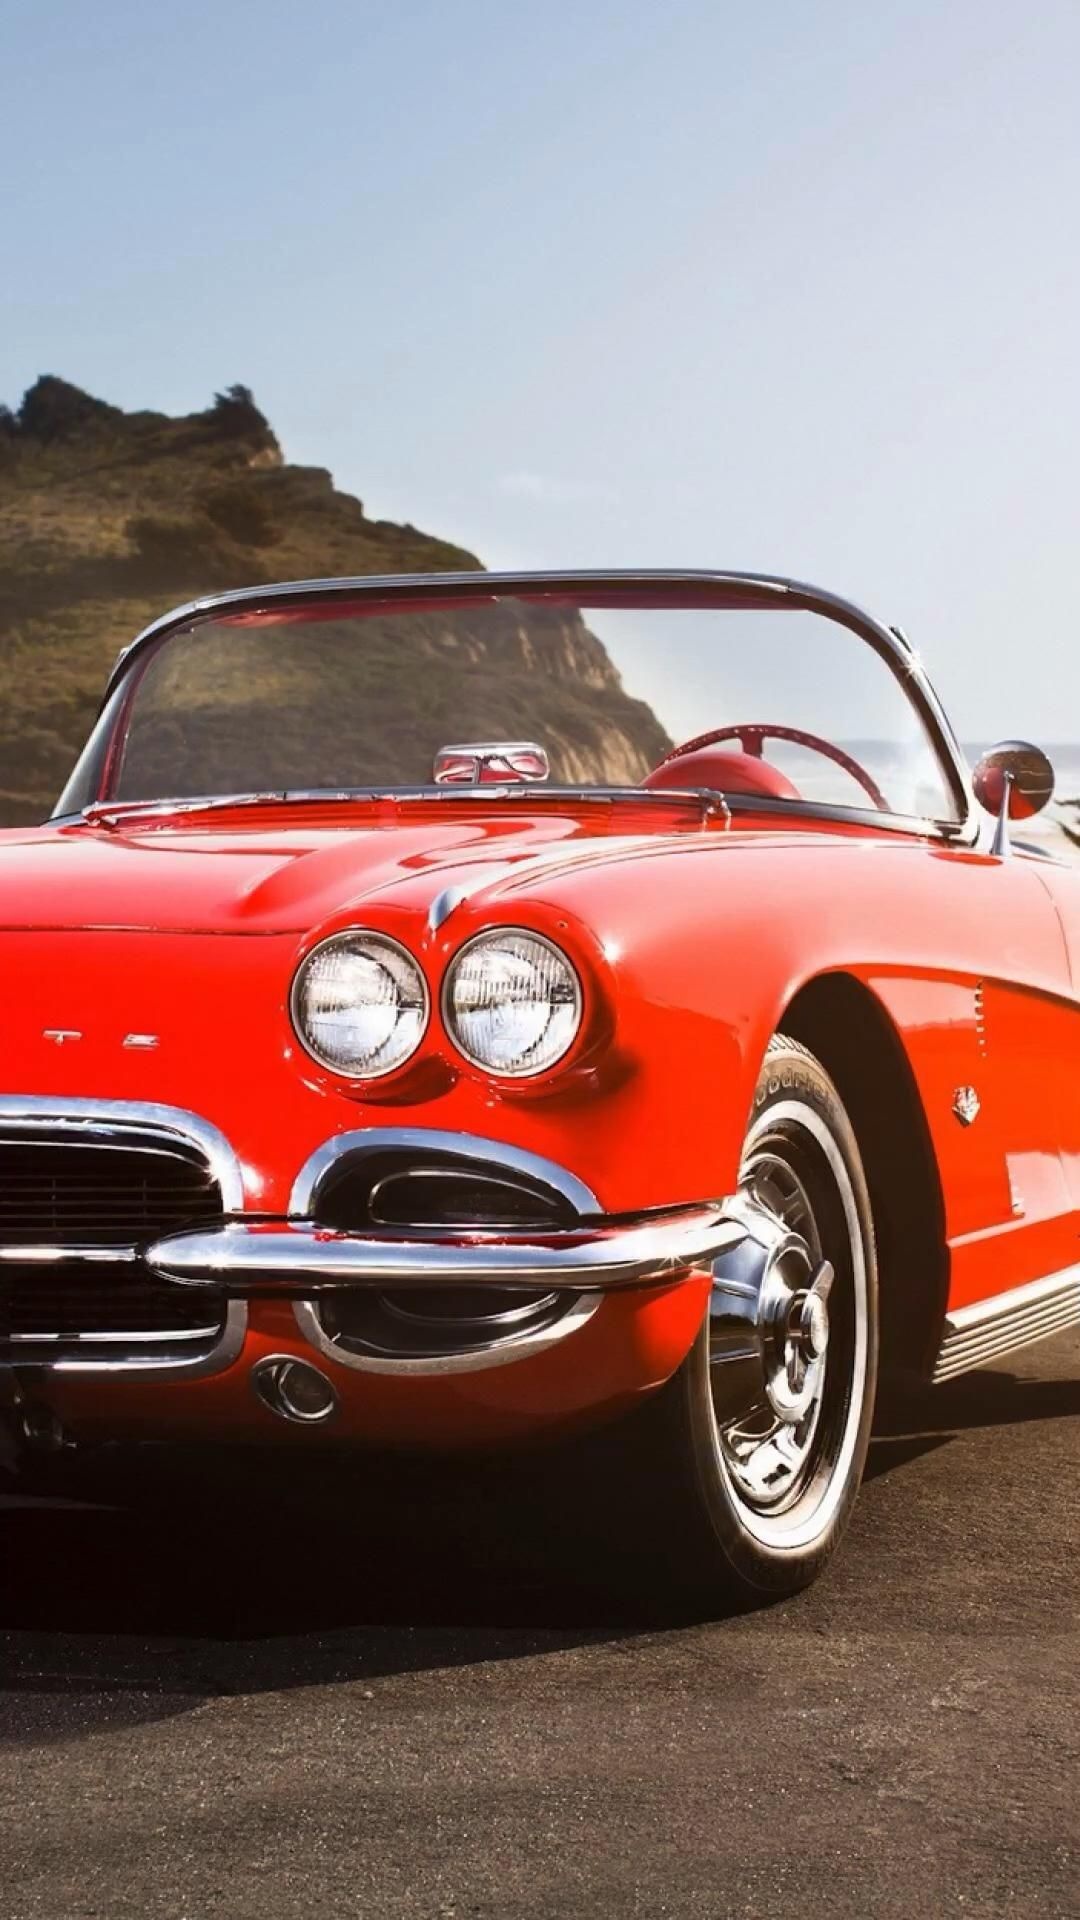 Vintage Car: Achieved legendary status due to the racing heritage, Chevrolet Corvette. 1080x1920 Full HD Wallpaper.